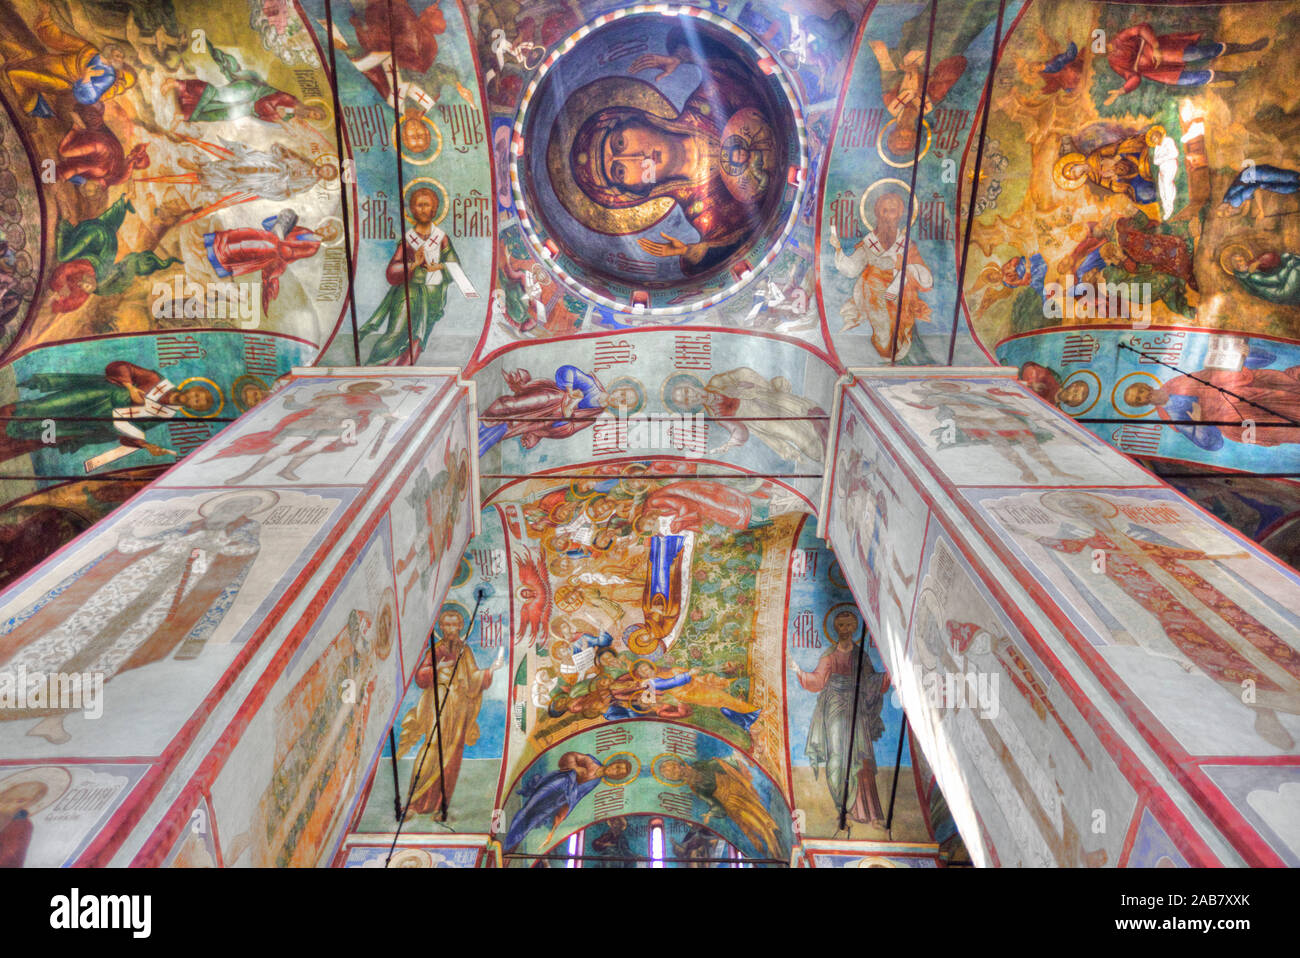 Frescoes Holy Dormition Cathedral The Holy Trinity St Sergius Lavra